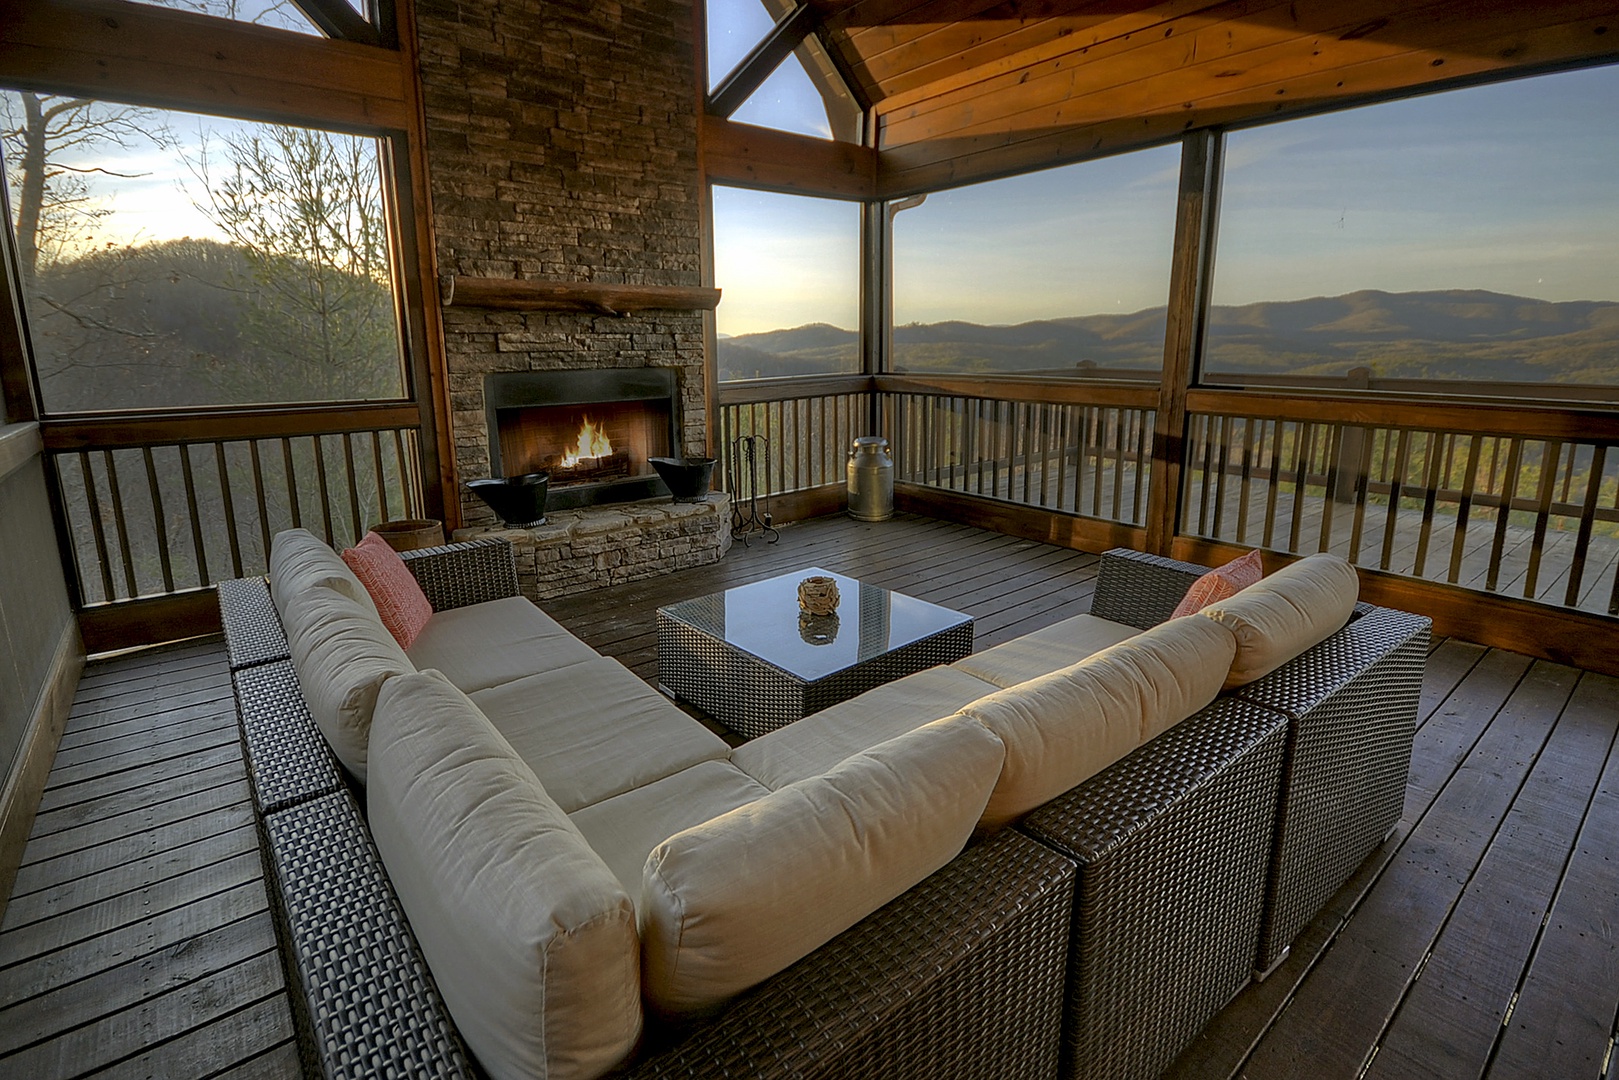 Bearcat Lodge - Screened in porch with outdoor seating and fireplace